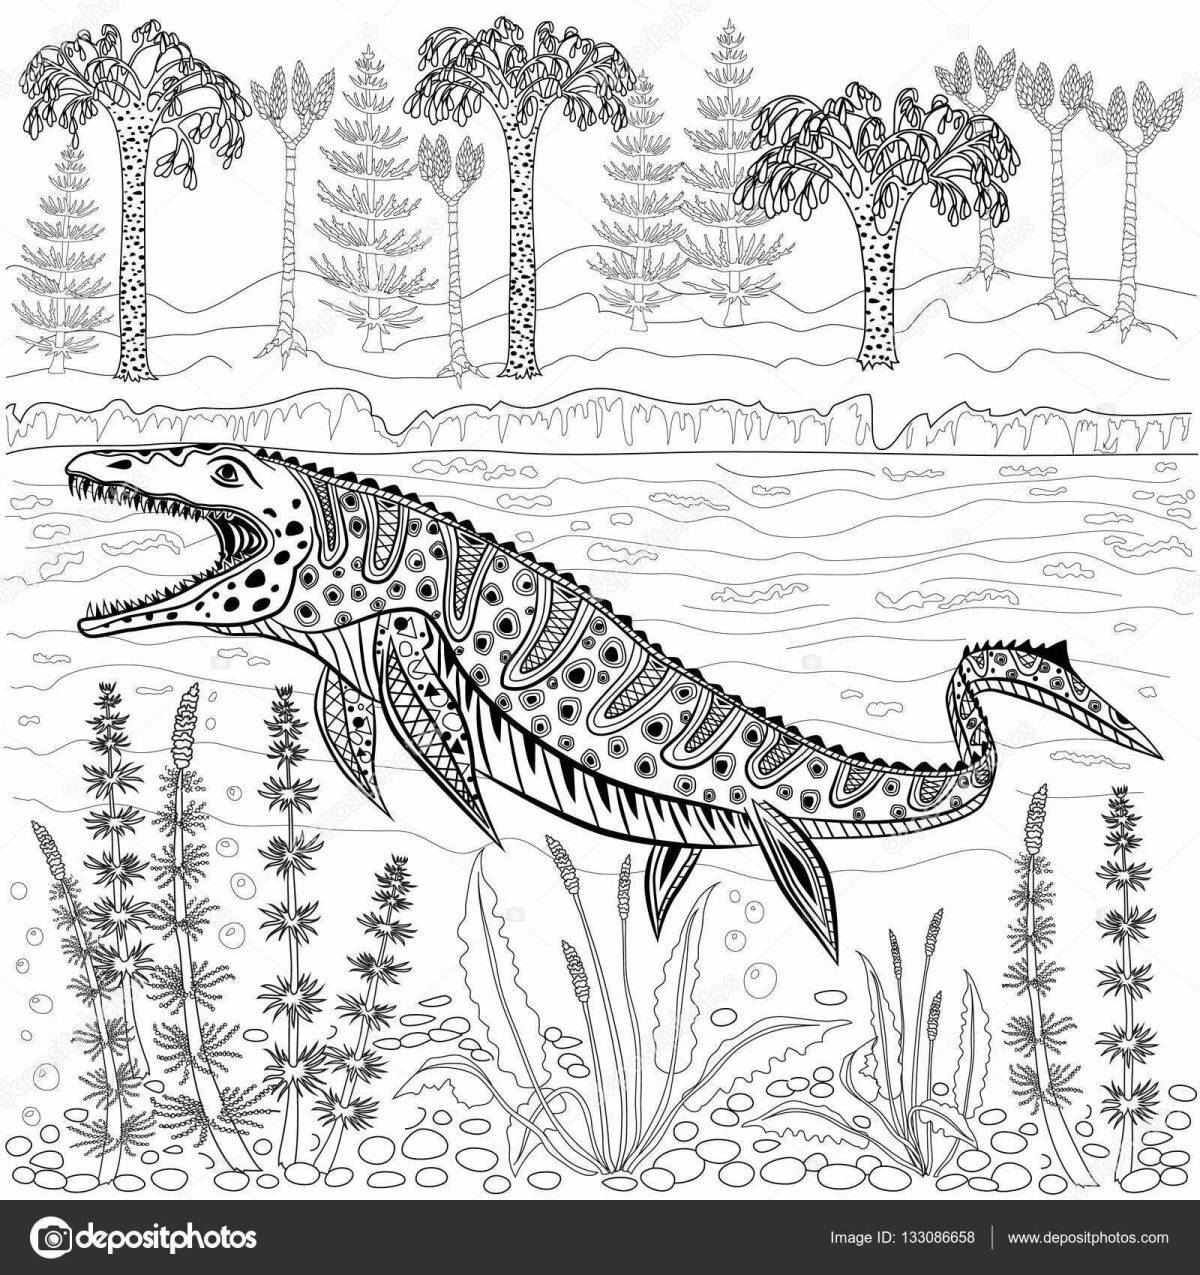 Glitter underwater dinosaur coloring page